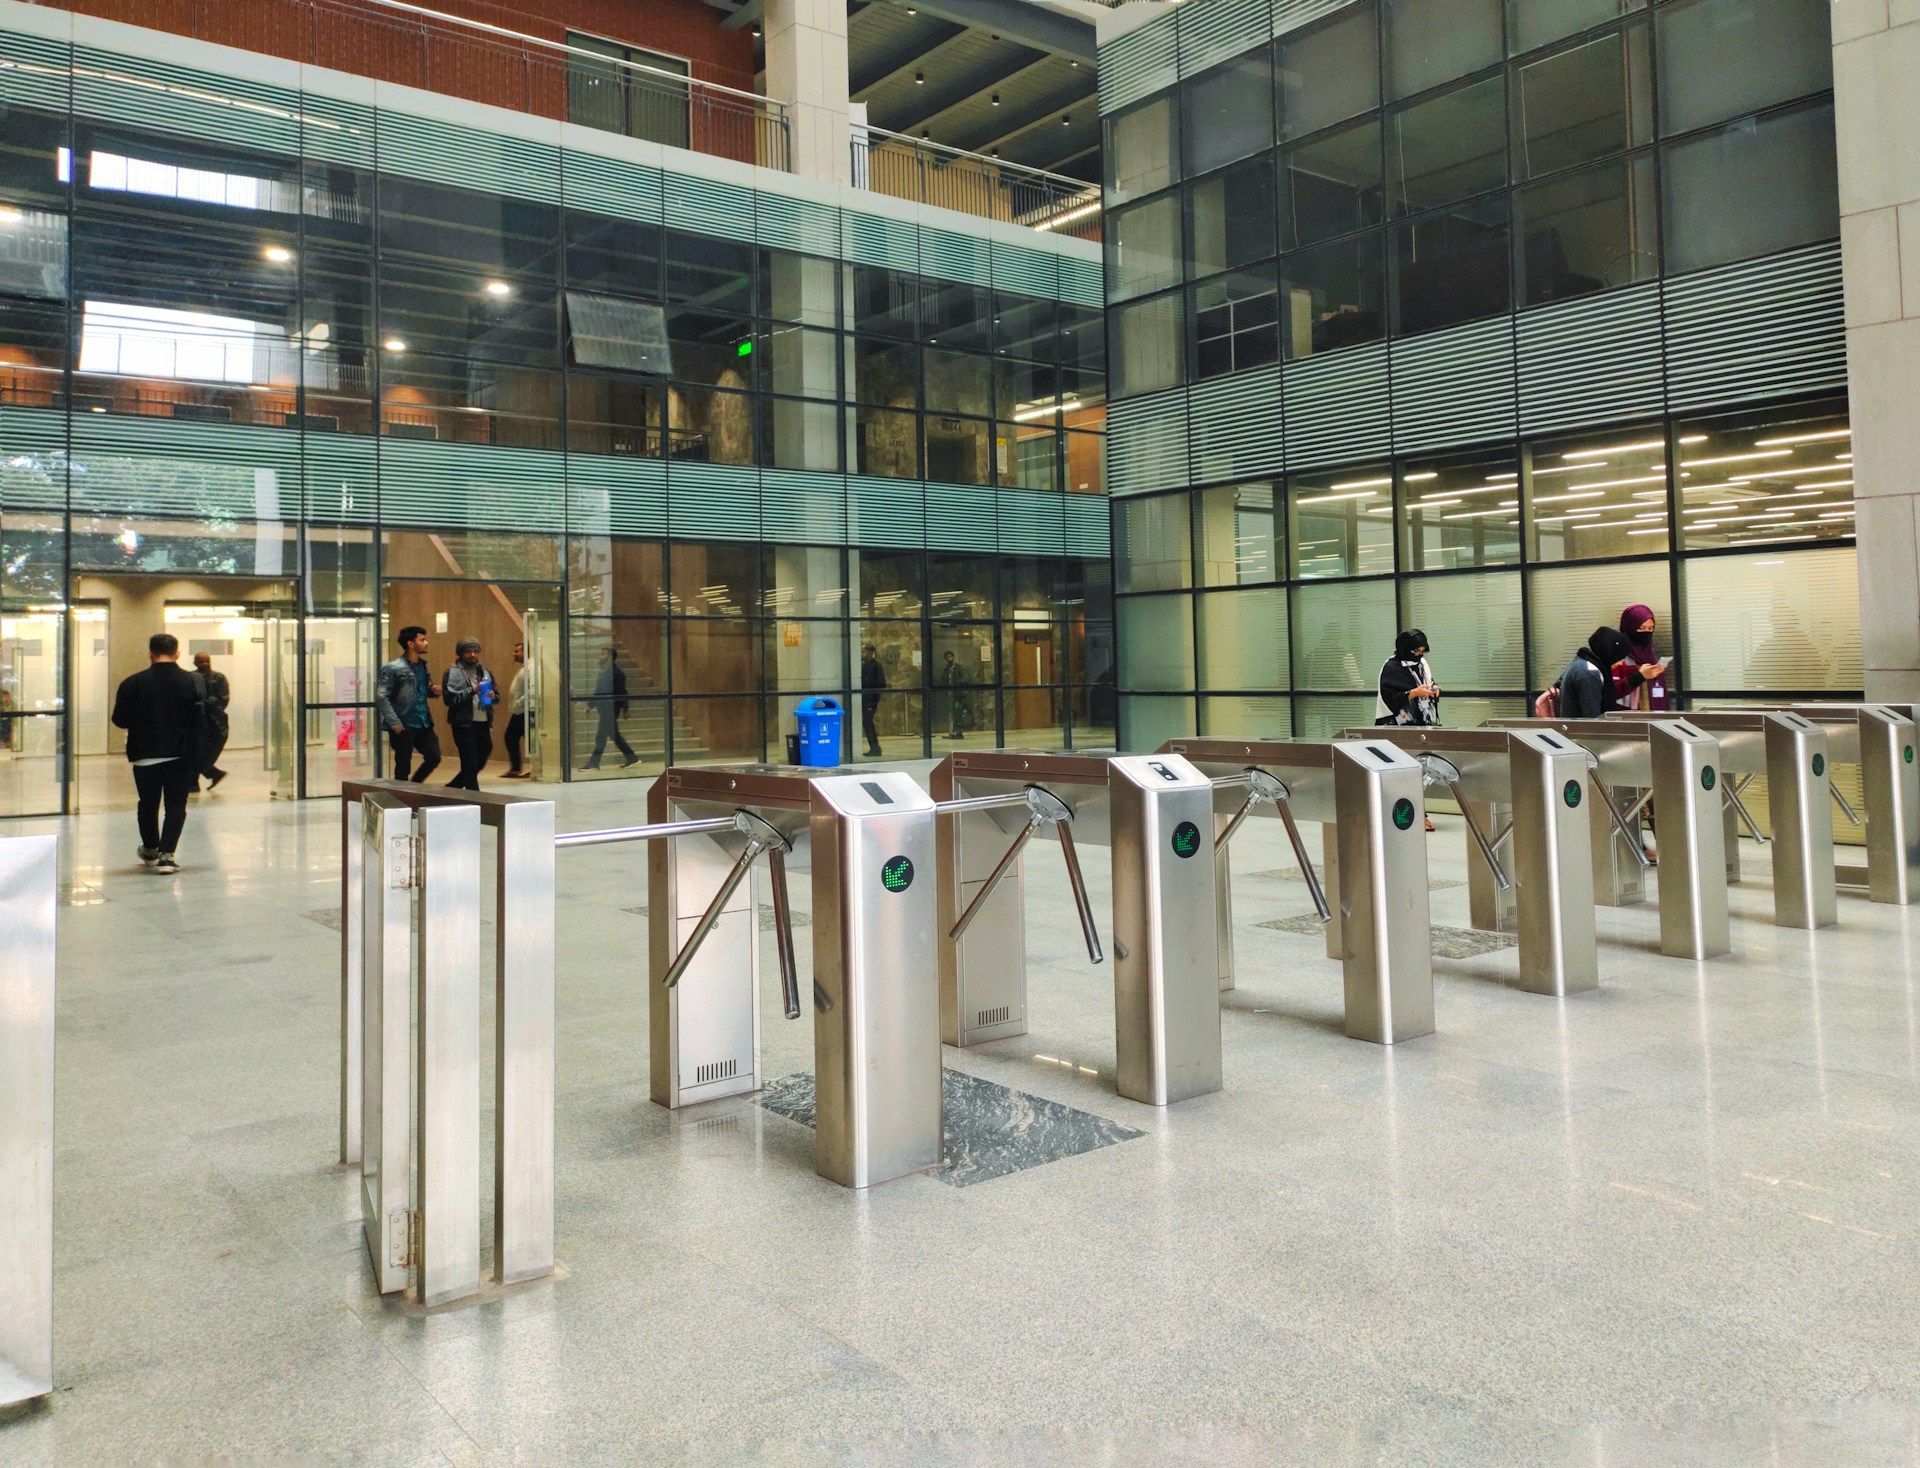 A row of Turnstiles outside a modern building